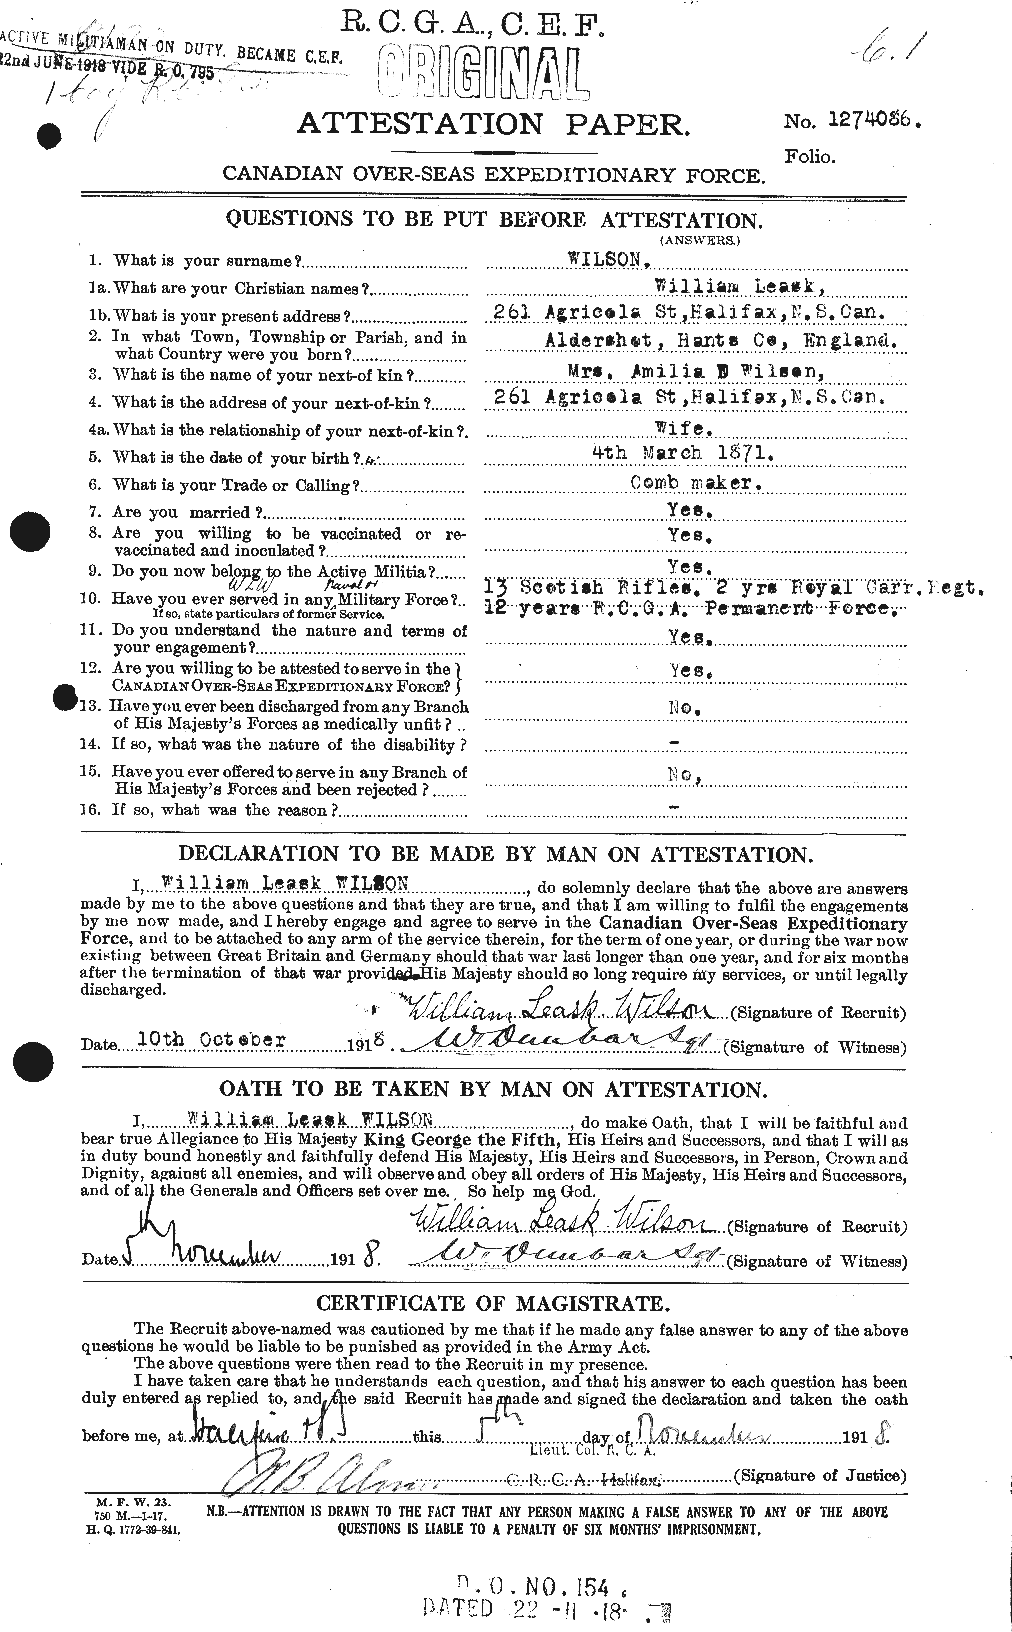 Personnel Records of the First World War - CEF 684071a